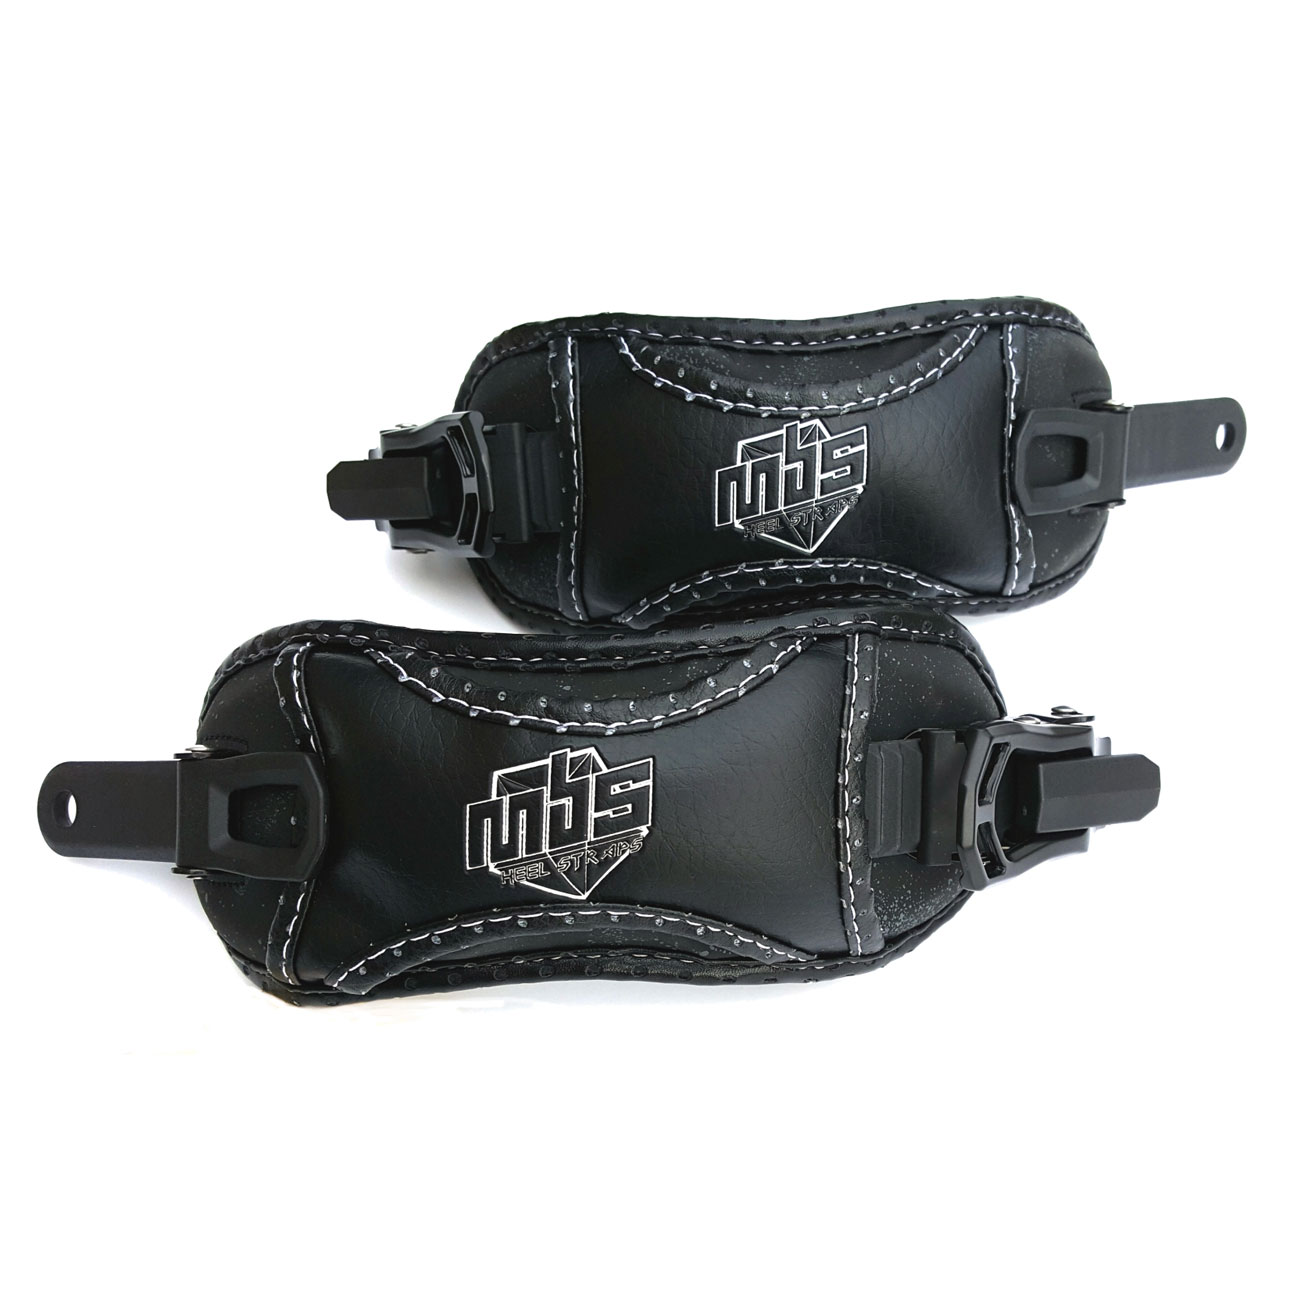 New MBS F5 Heelstraps now available!